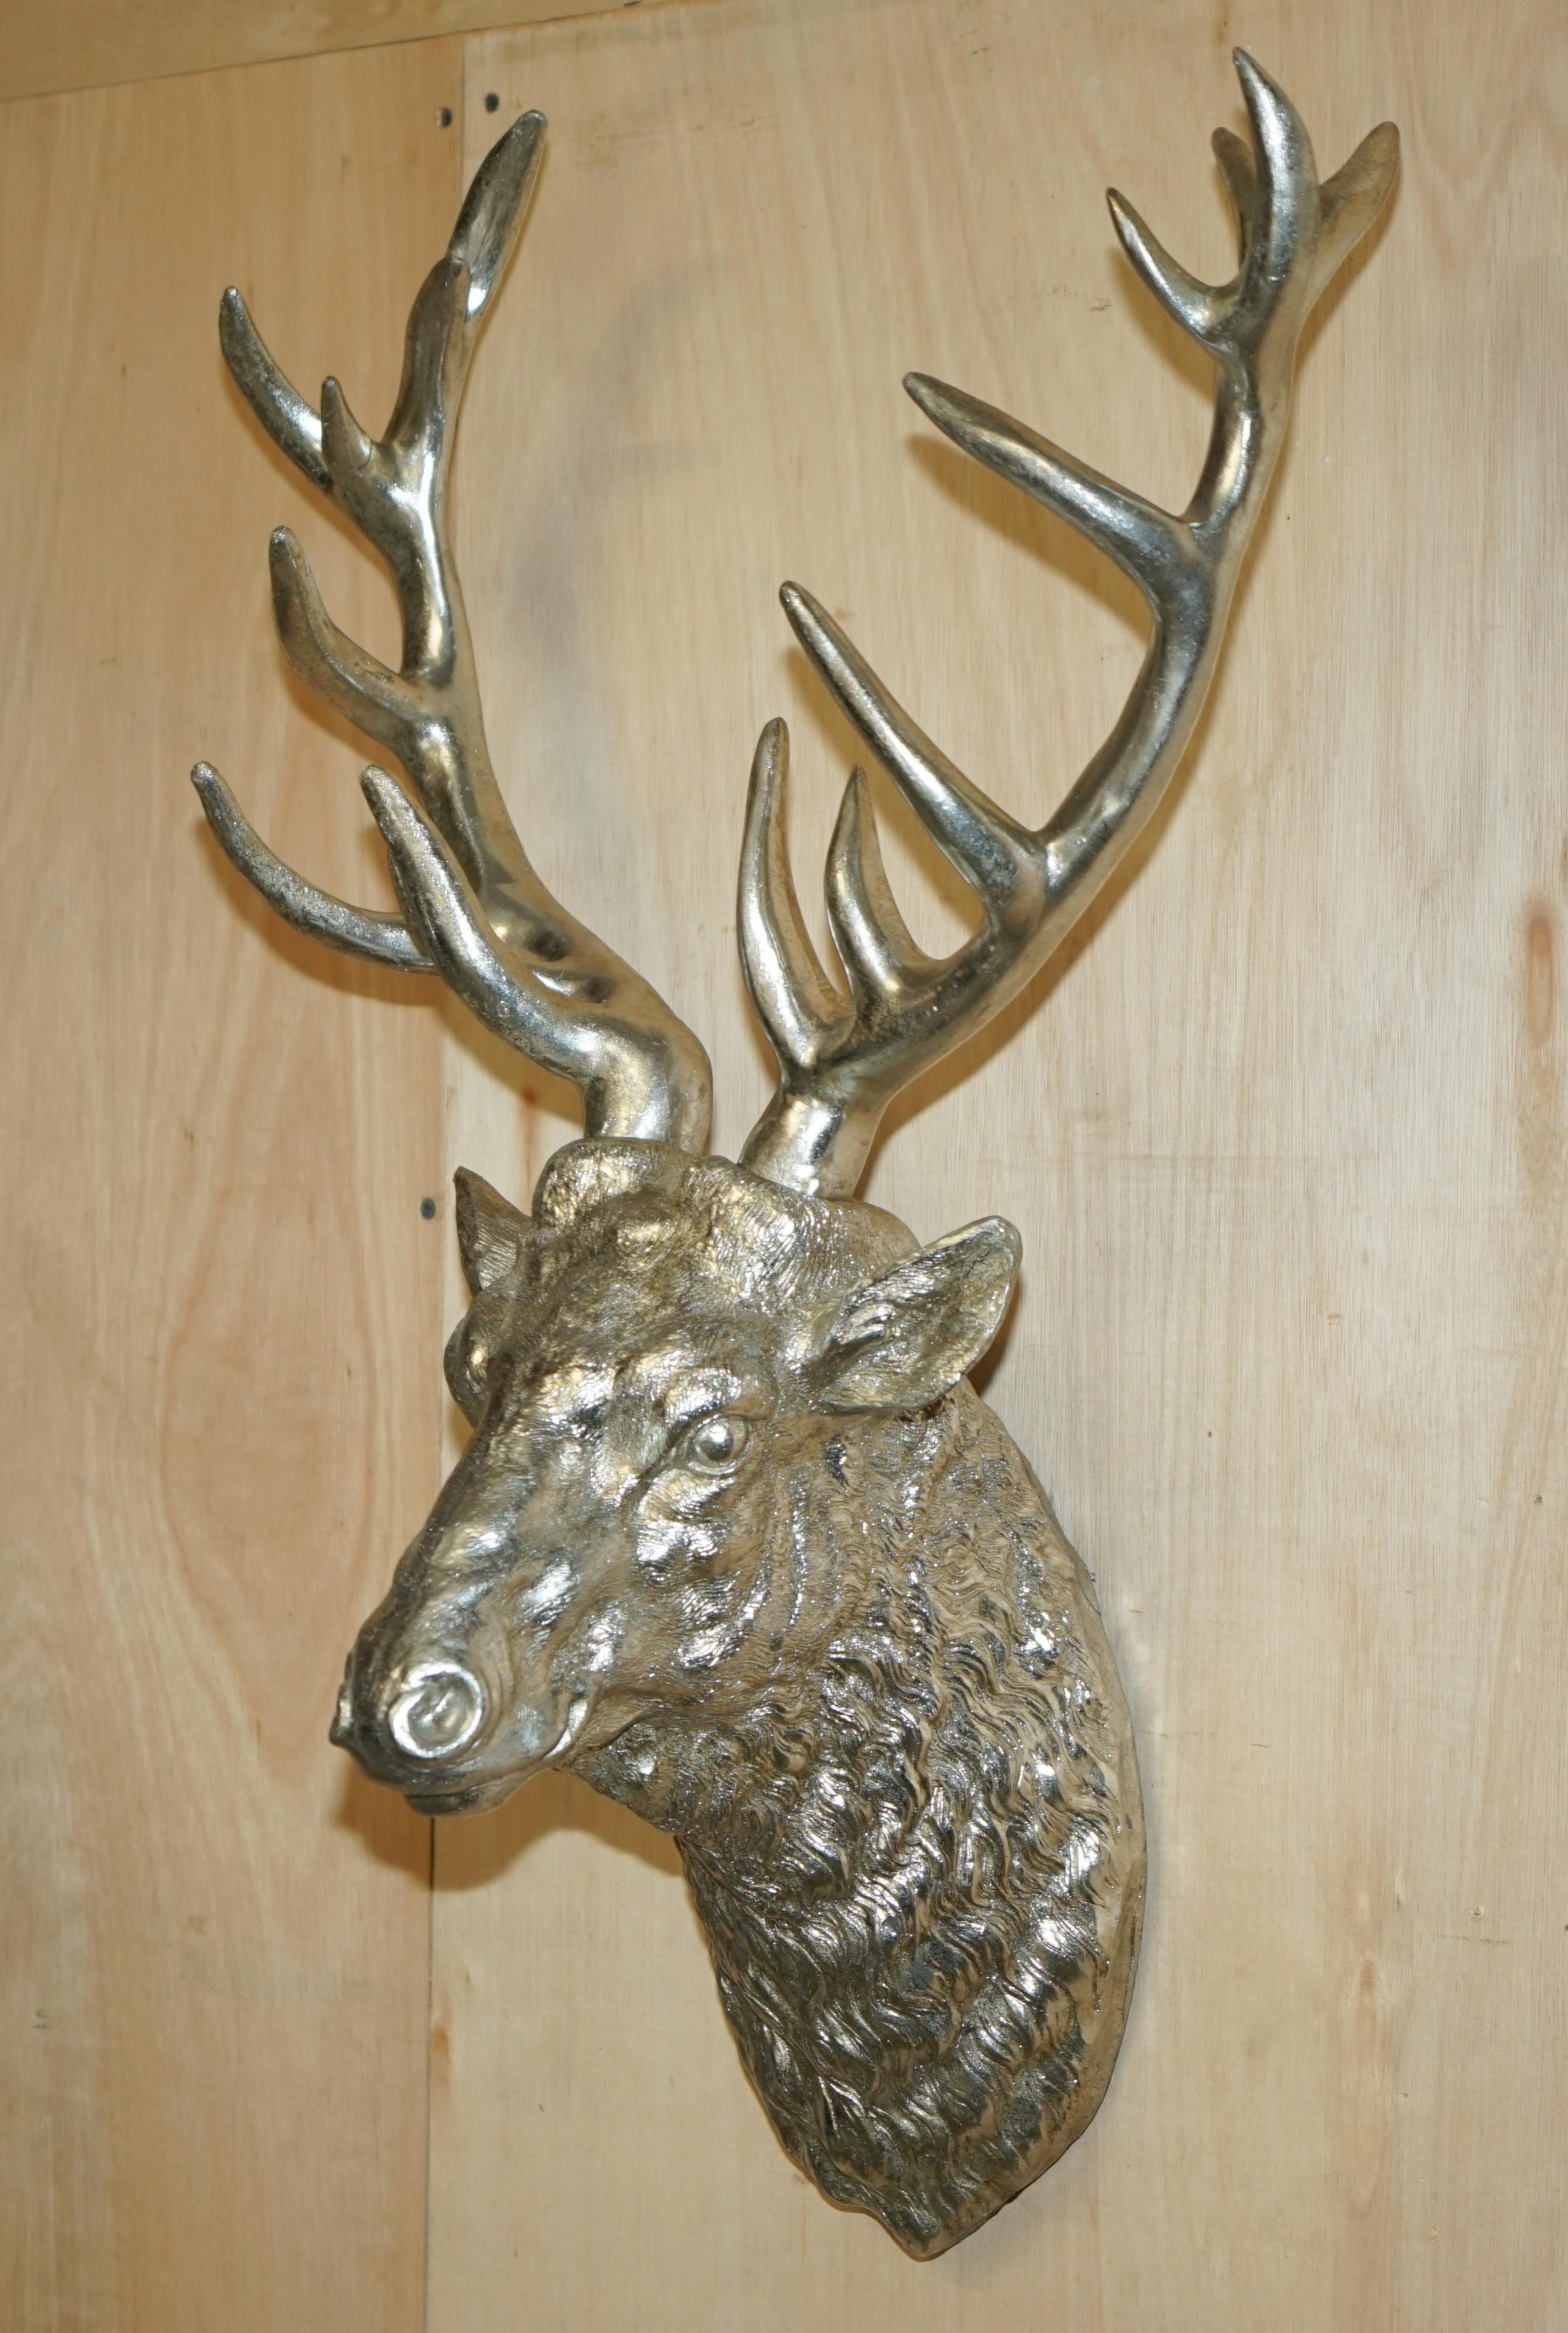 FULL SIZED SILVERED DEER STAG HEAD WiTH REMOVABLE ANTLERS DECORATIVE FOIL FINISH For Sale 9